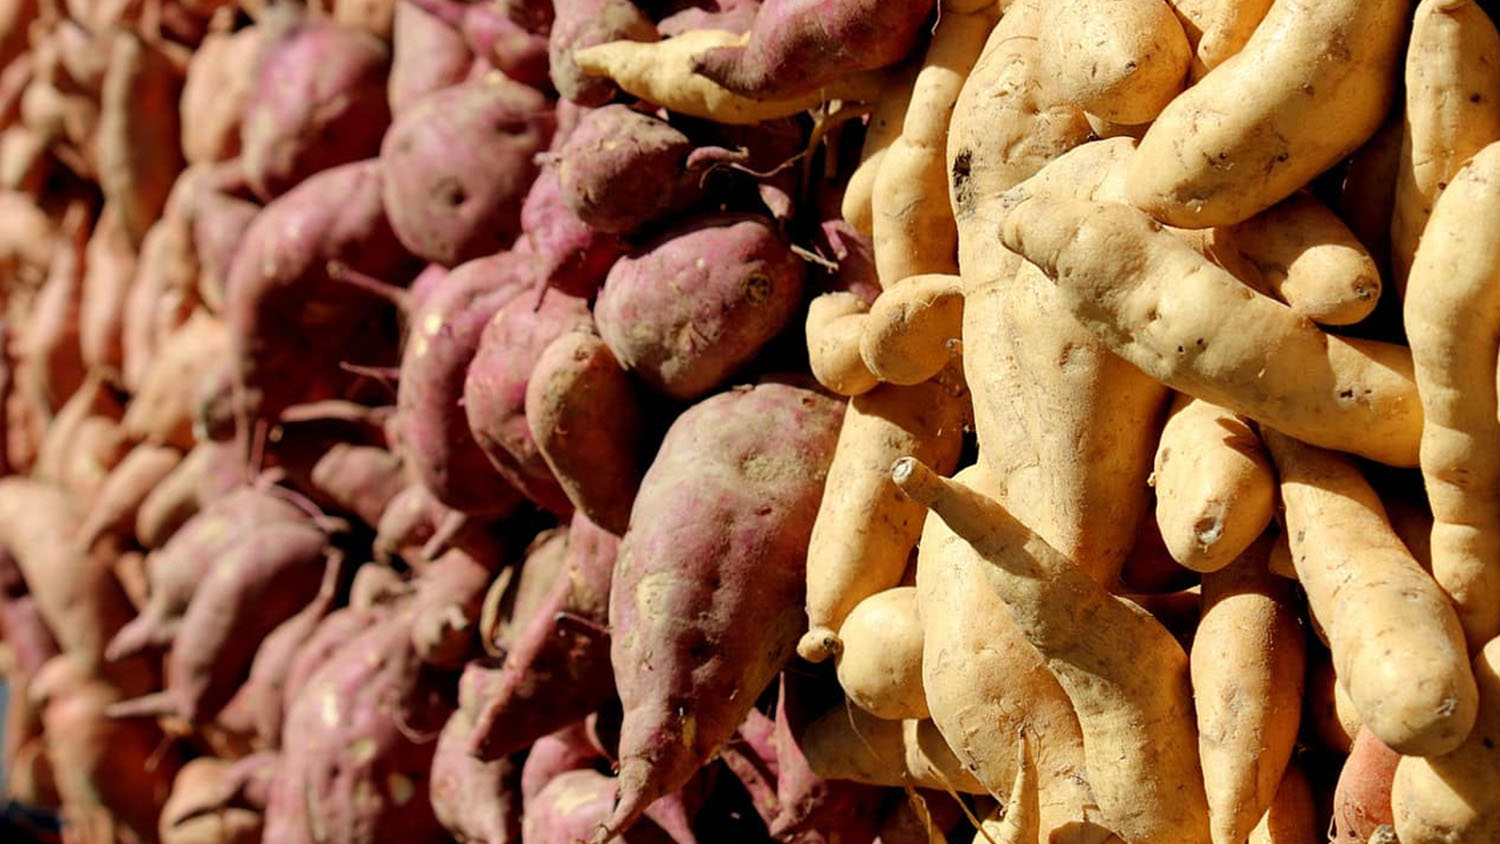 Three different varieties of sweetpotatoes with different skin colors.